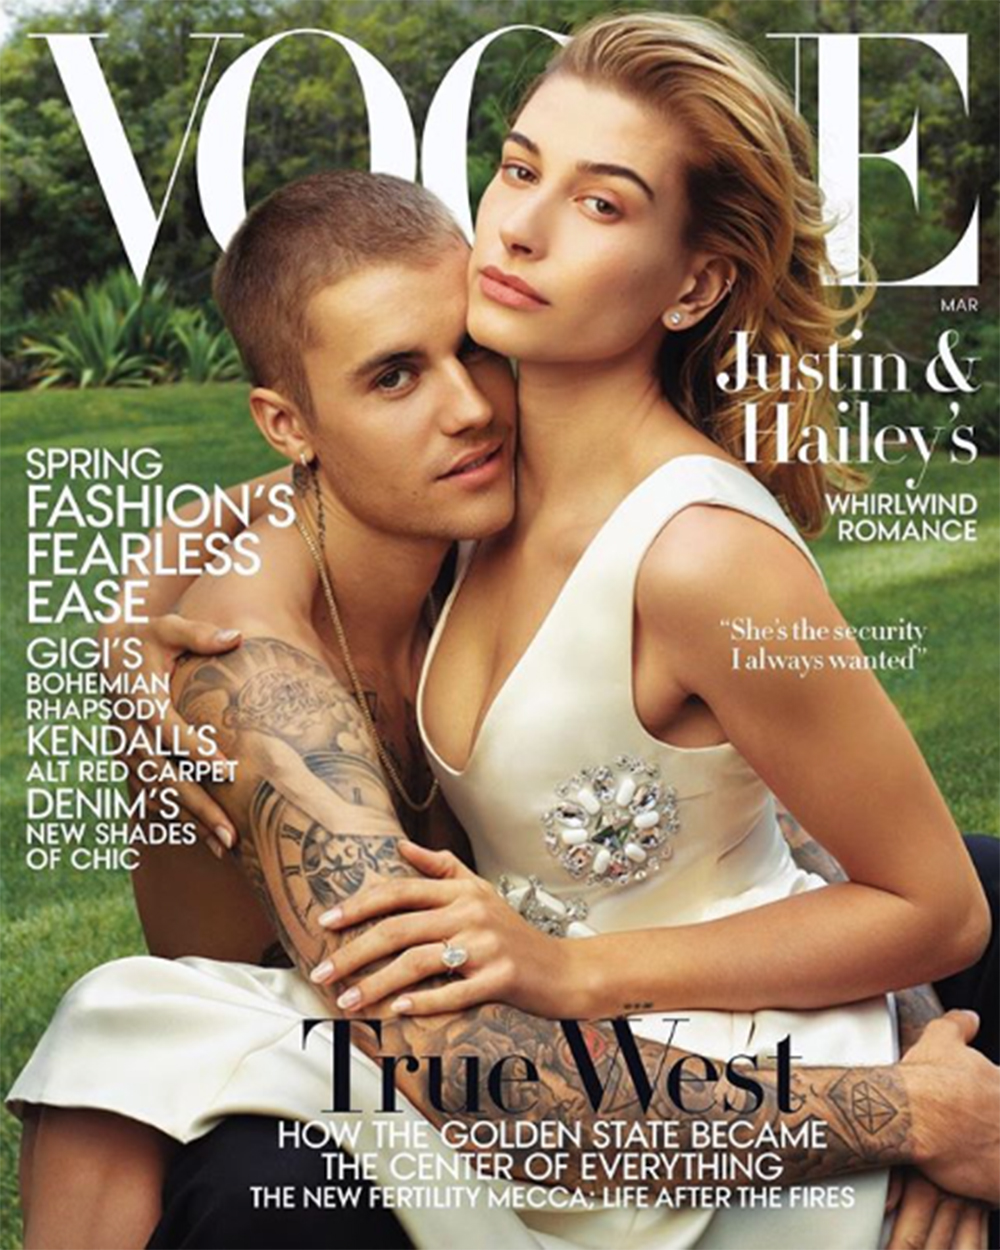 『VOGUE』表紙を飾ったジャスティン＆ヘイリー夫妻（画像は『Hailey Rhode Bieber　2019年2月7日付Instagram「so excited to cover ＠voguemagazine’s March issue with my loveeeeeee shot by ＃AnnieLeibovitz Read our full cover story in the link in my bio」』のスクリーンショット）